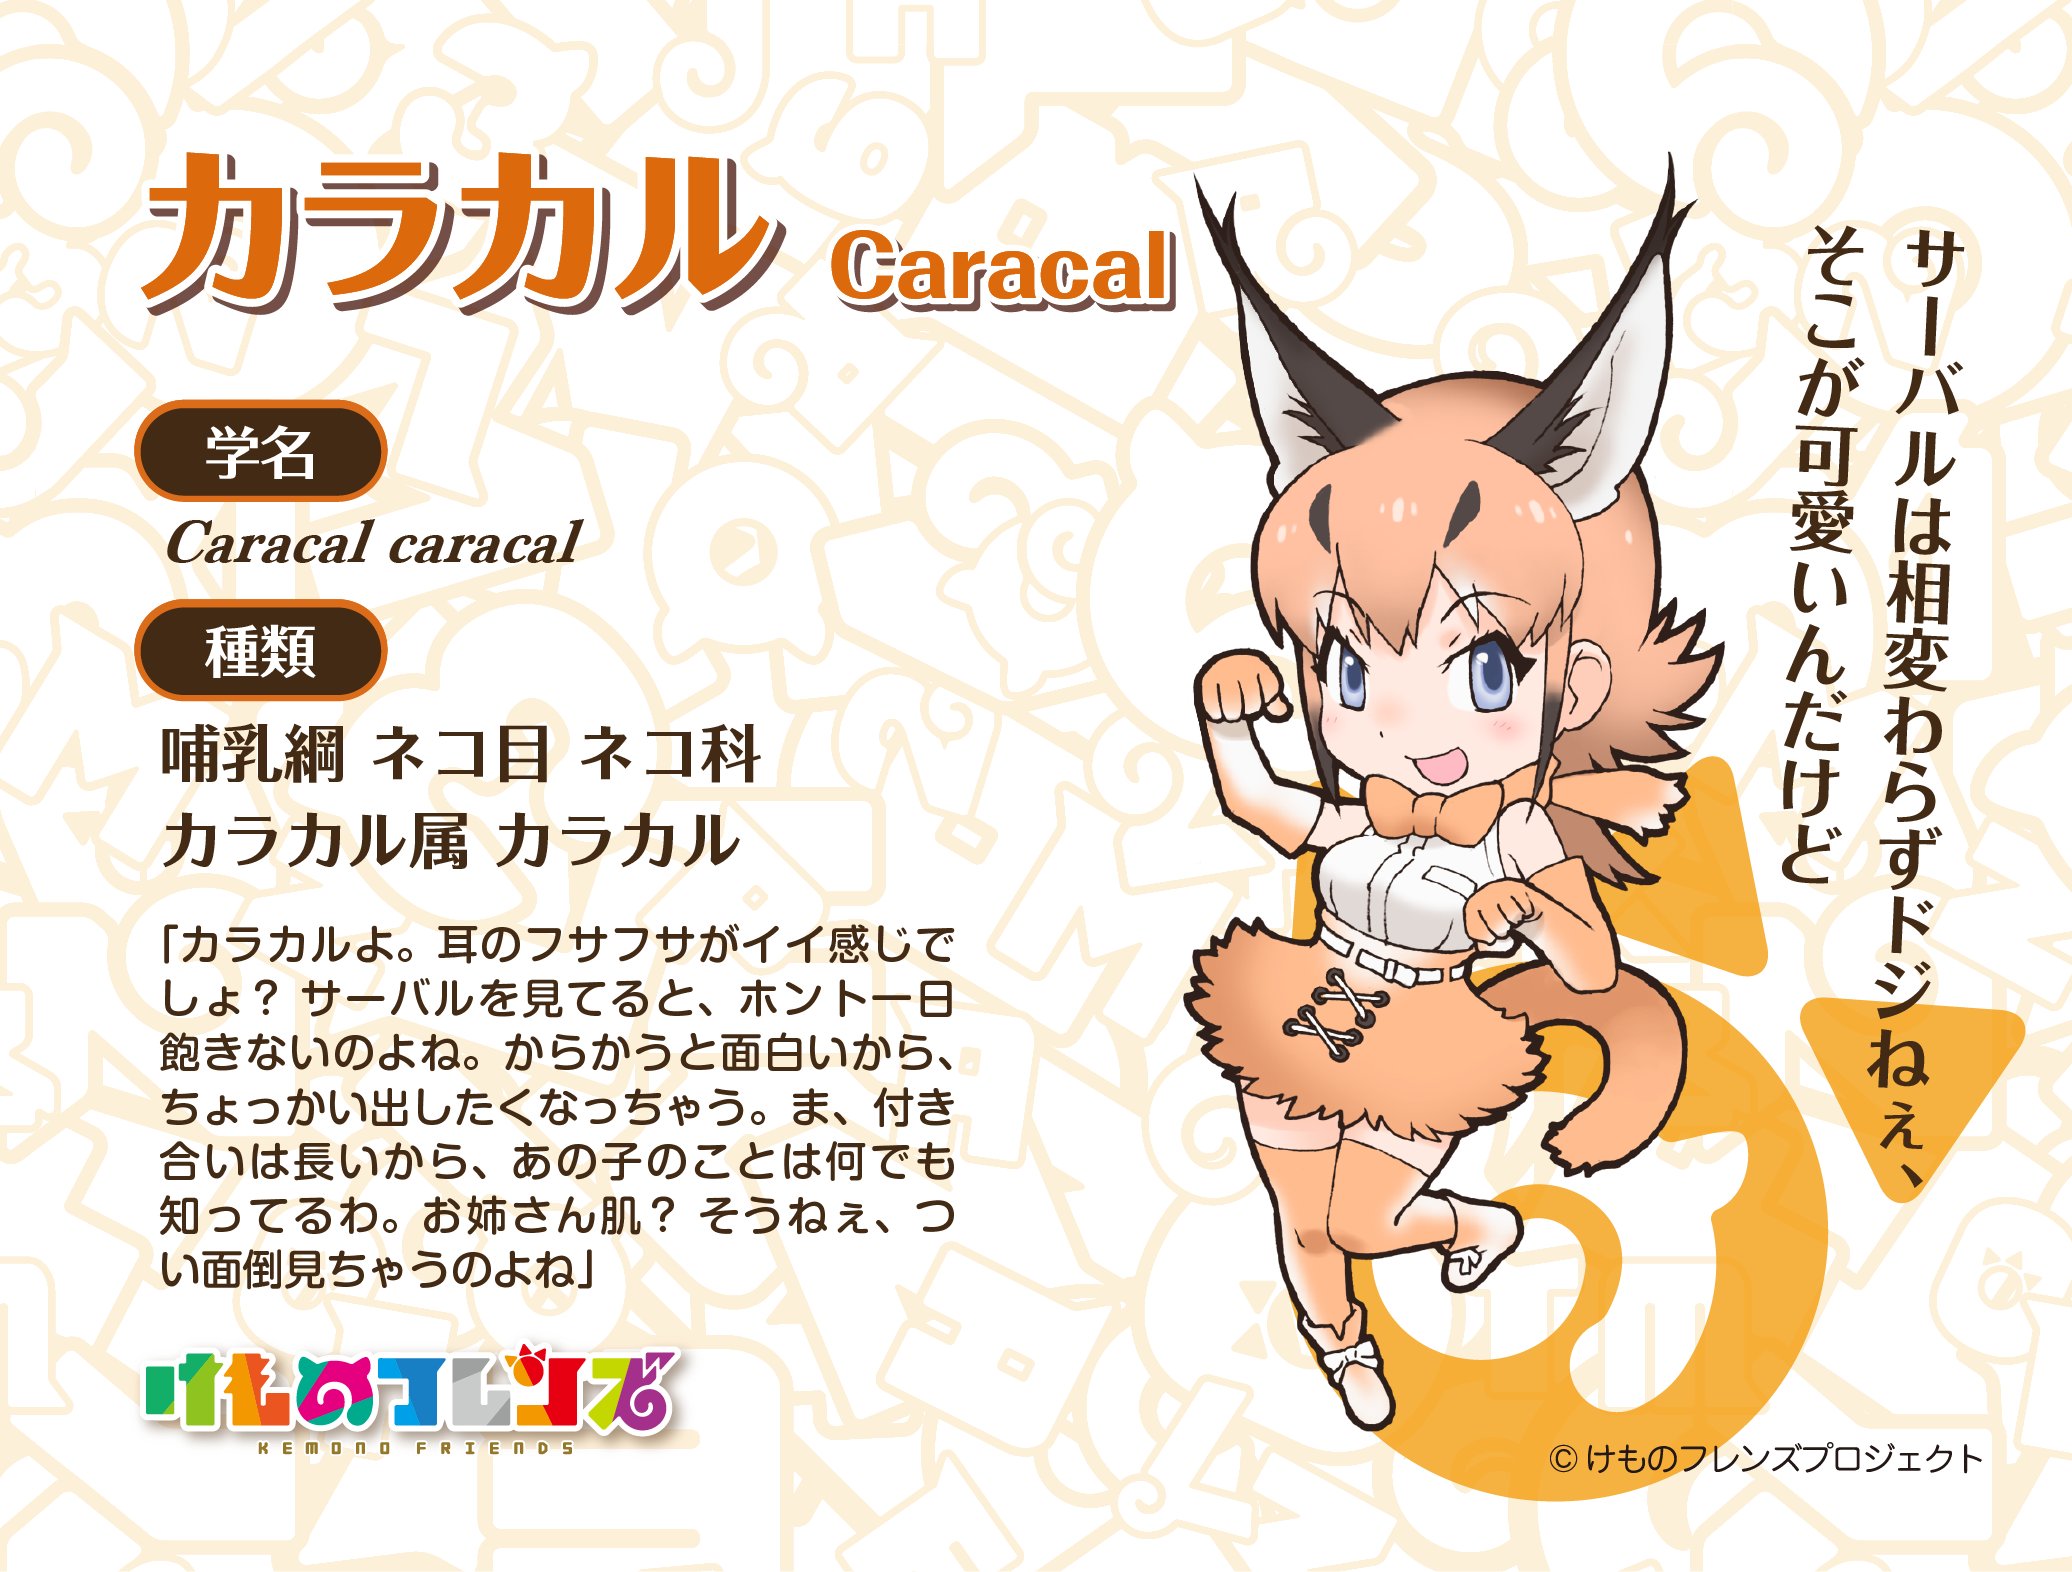 Caracal profile posted by Kemono Friends Project Twitter account.